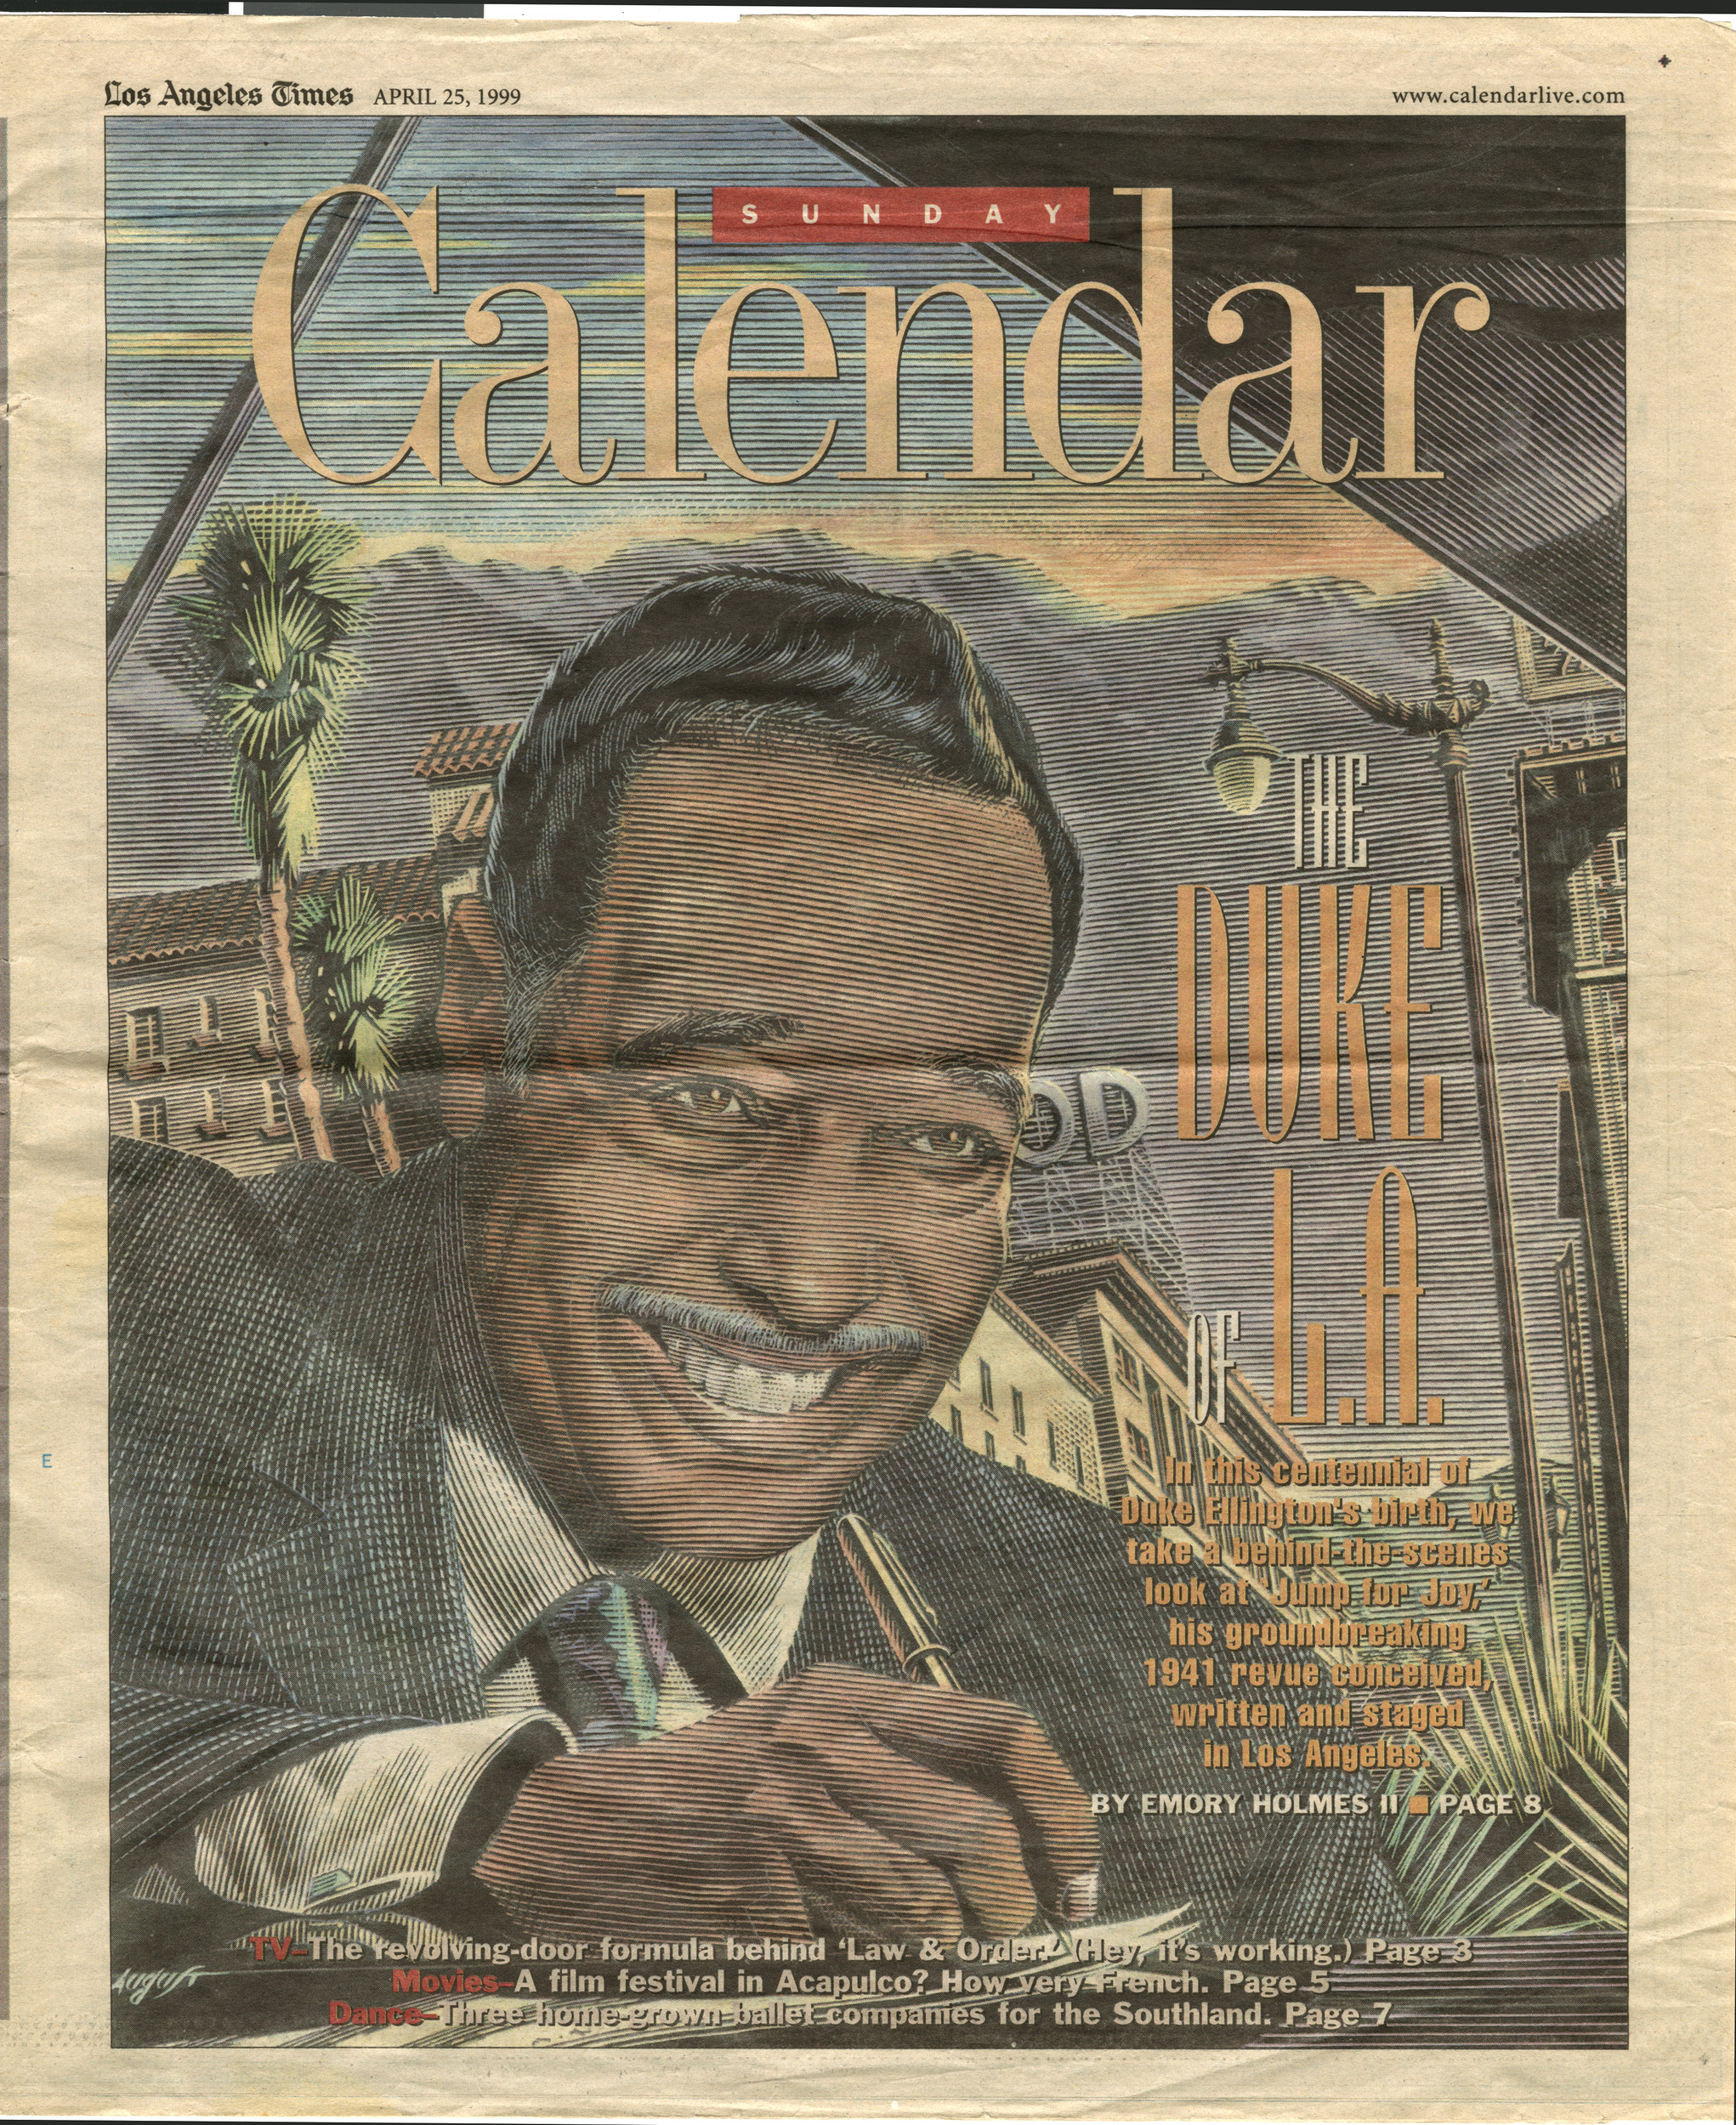 Newspaper clipping, The Duke of L.A.,  Los Angels Times, Sunday Calendar supplement, April 25, 1999